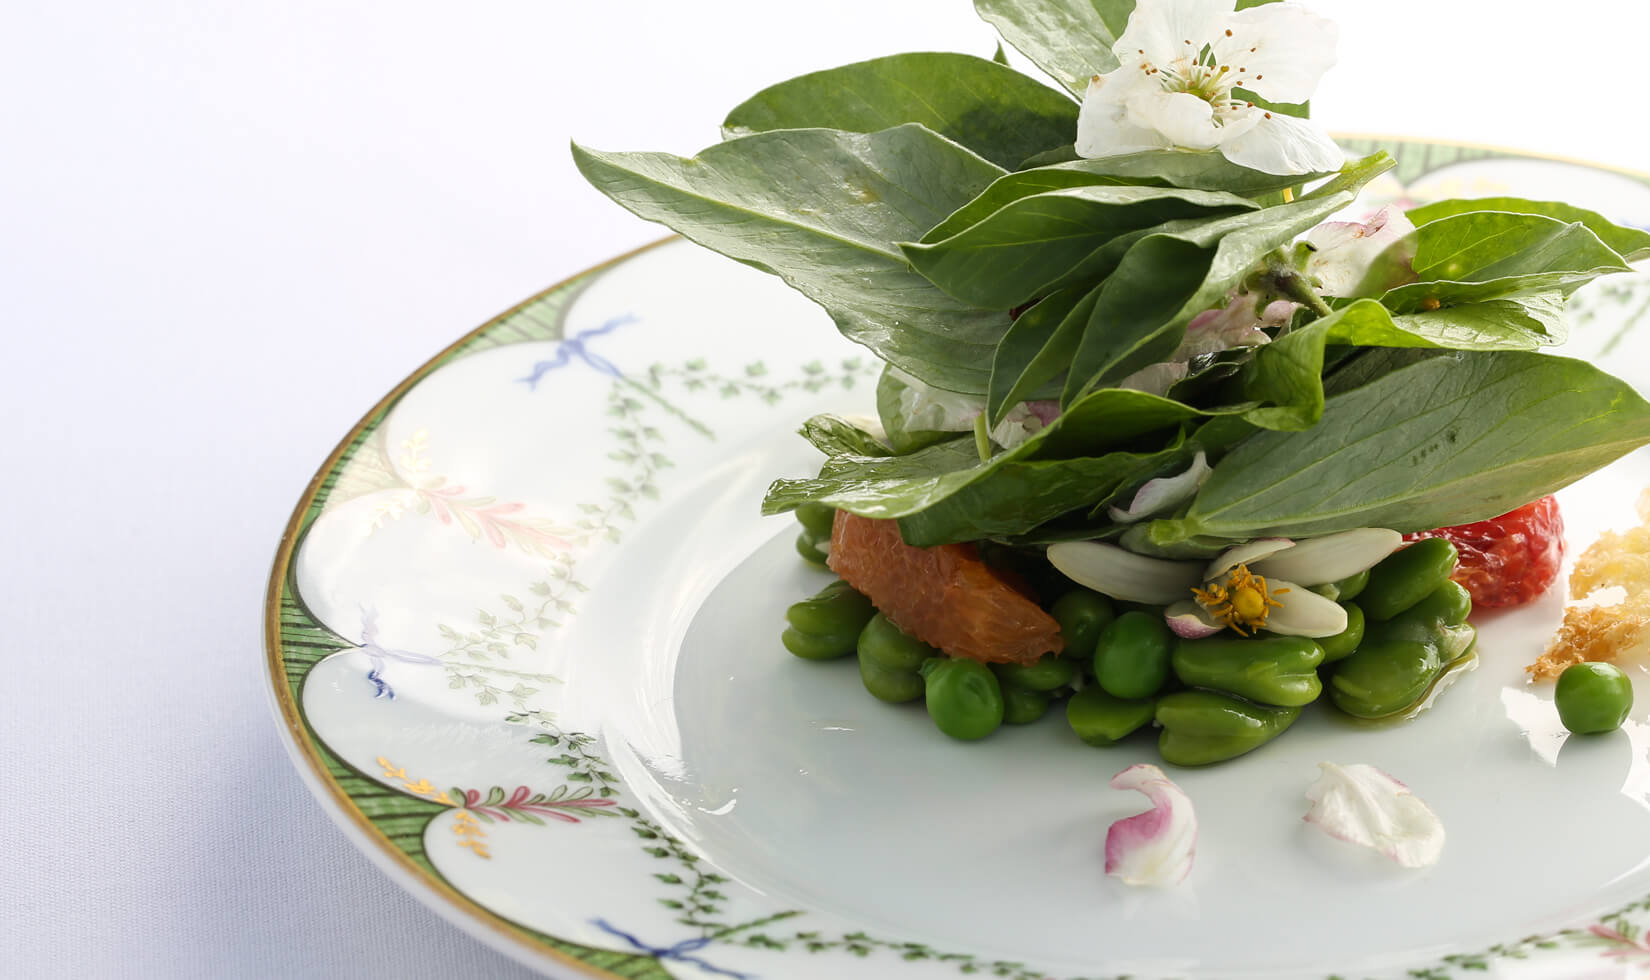 Spring Salad Recipe with Fava Beans and Edible Flowers Blossoms